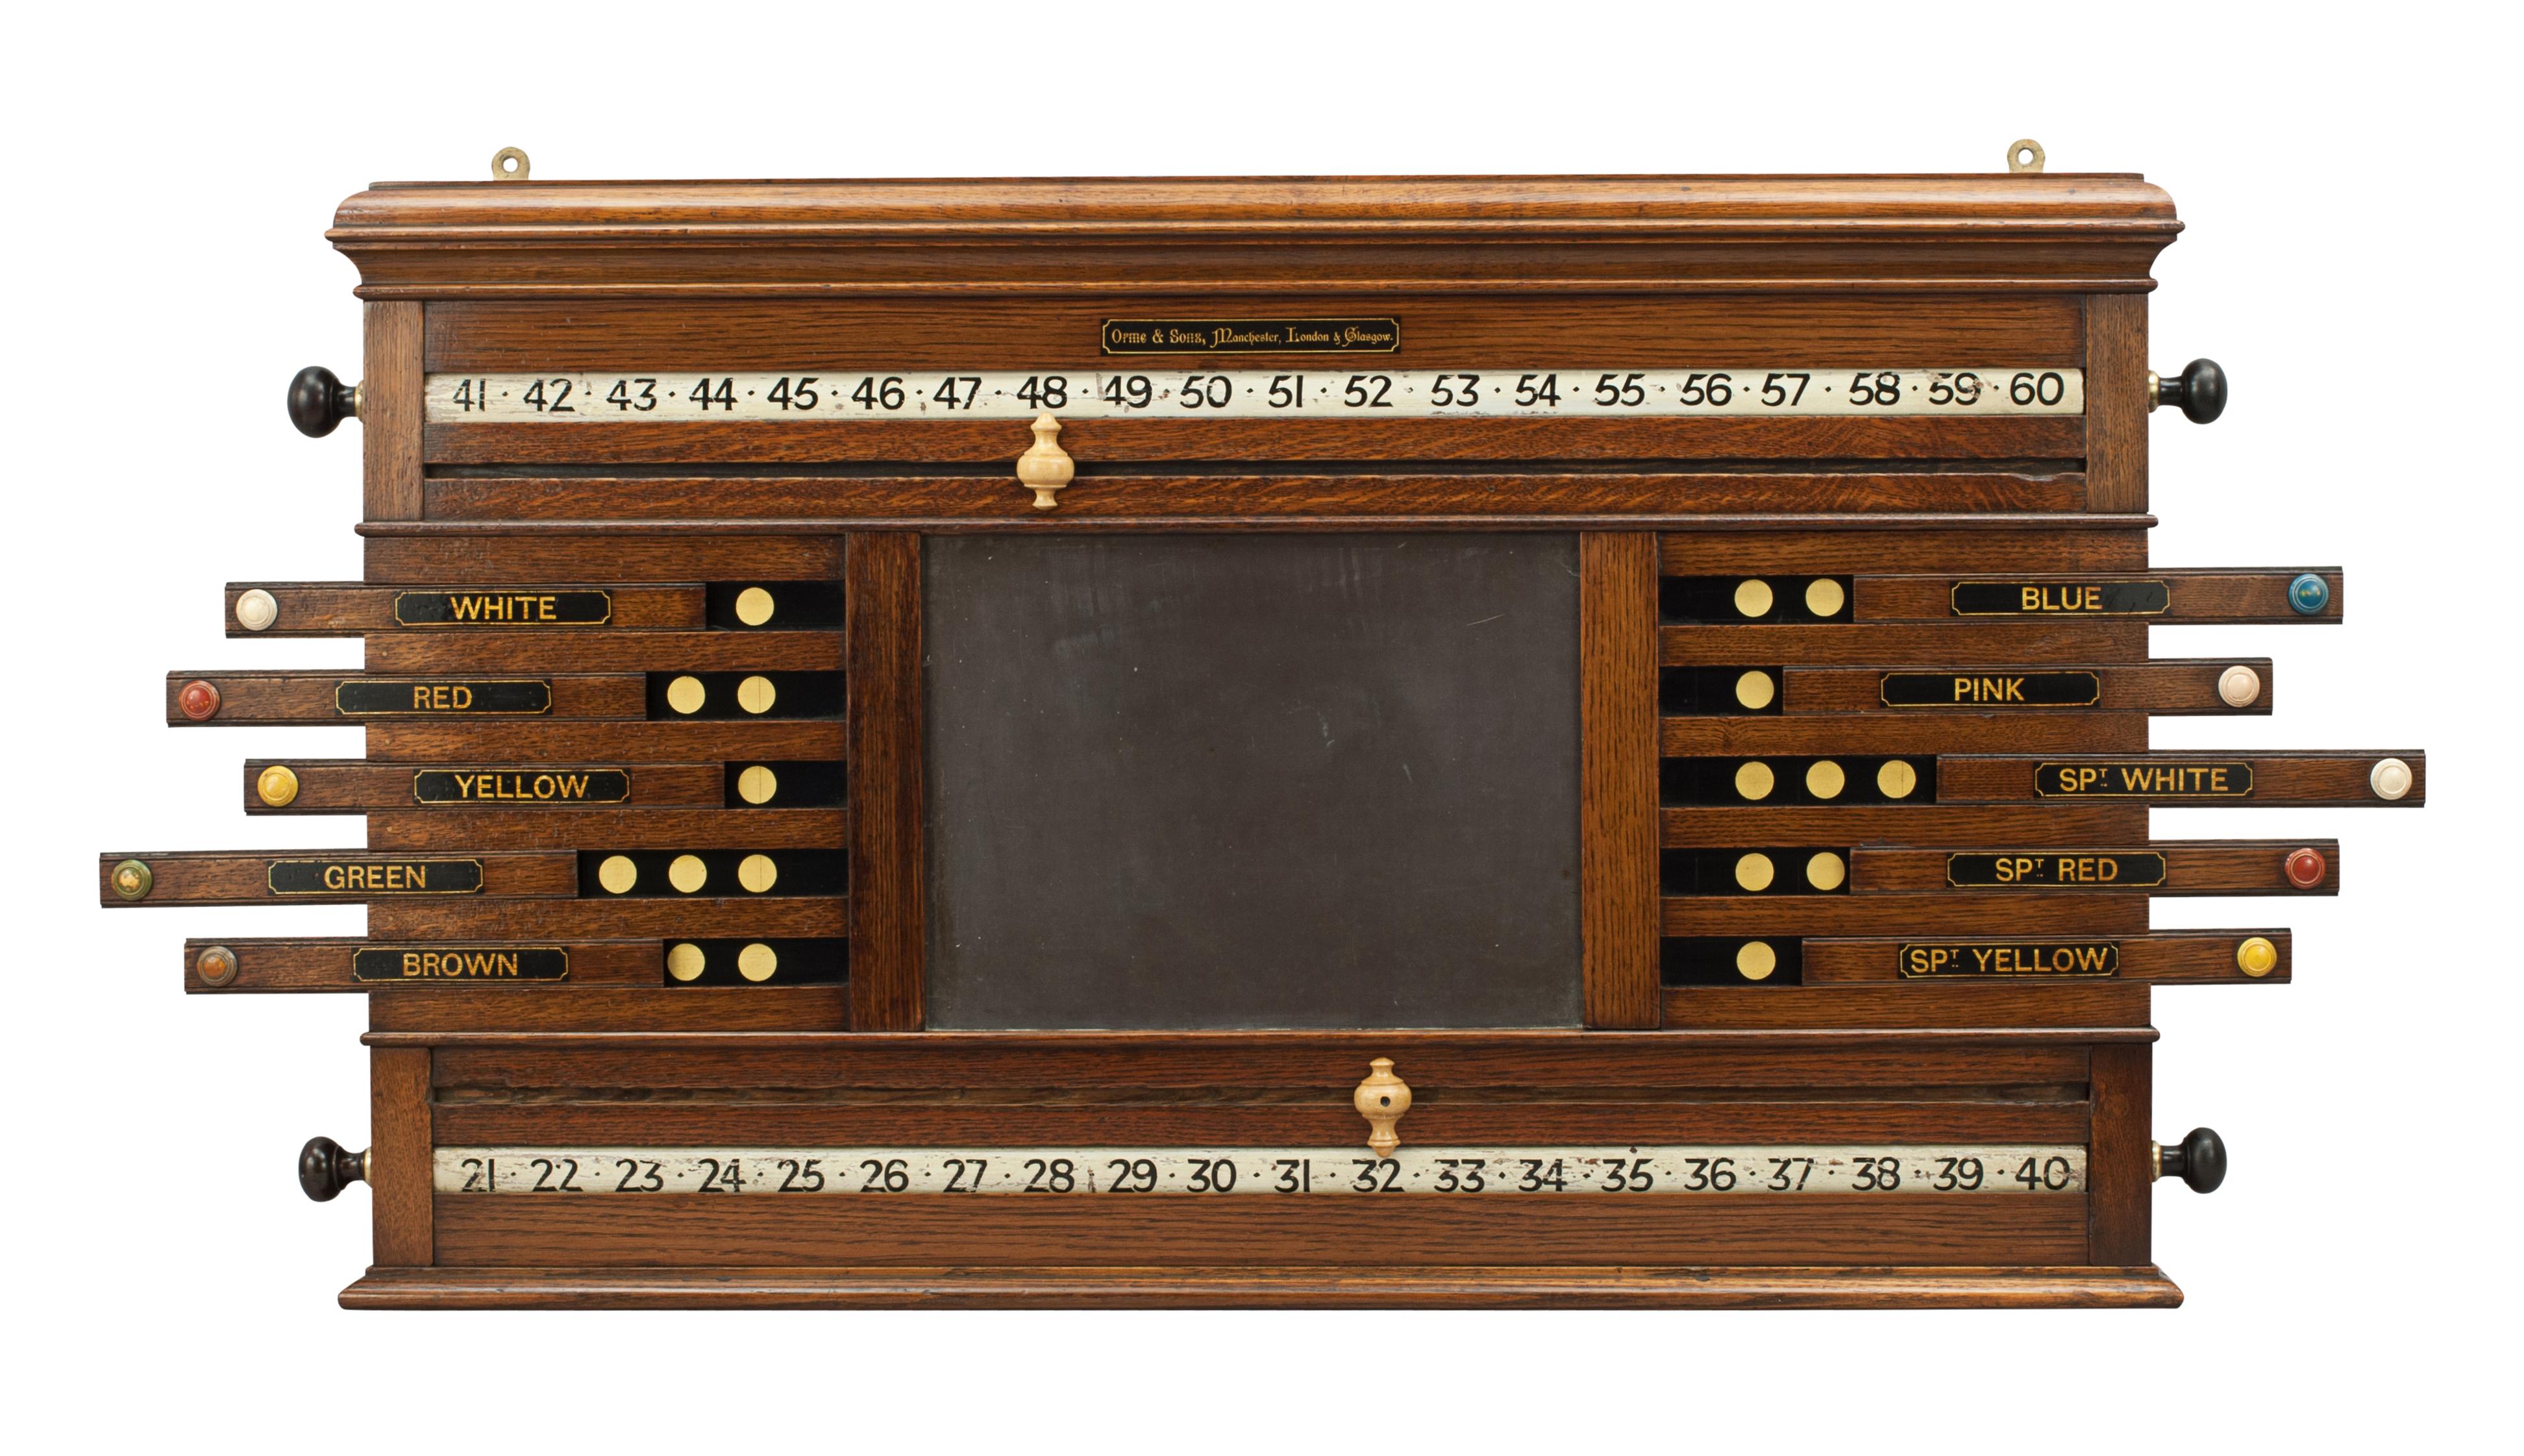 Orme & Sons Billiard scoreboard.
A nice combined billiards and life pool scoreboard made of oak by Orme & Sons, Manchester. The scorer comprised of two white rollers with black painted numbers, 0 to 20 / 20 to 40 / 40 to 60 / 60 to 80 / 80 to 100,